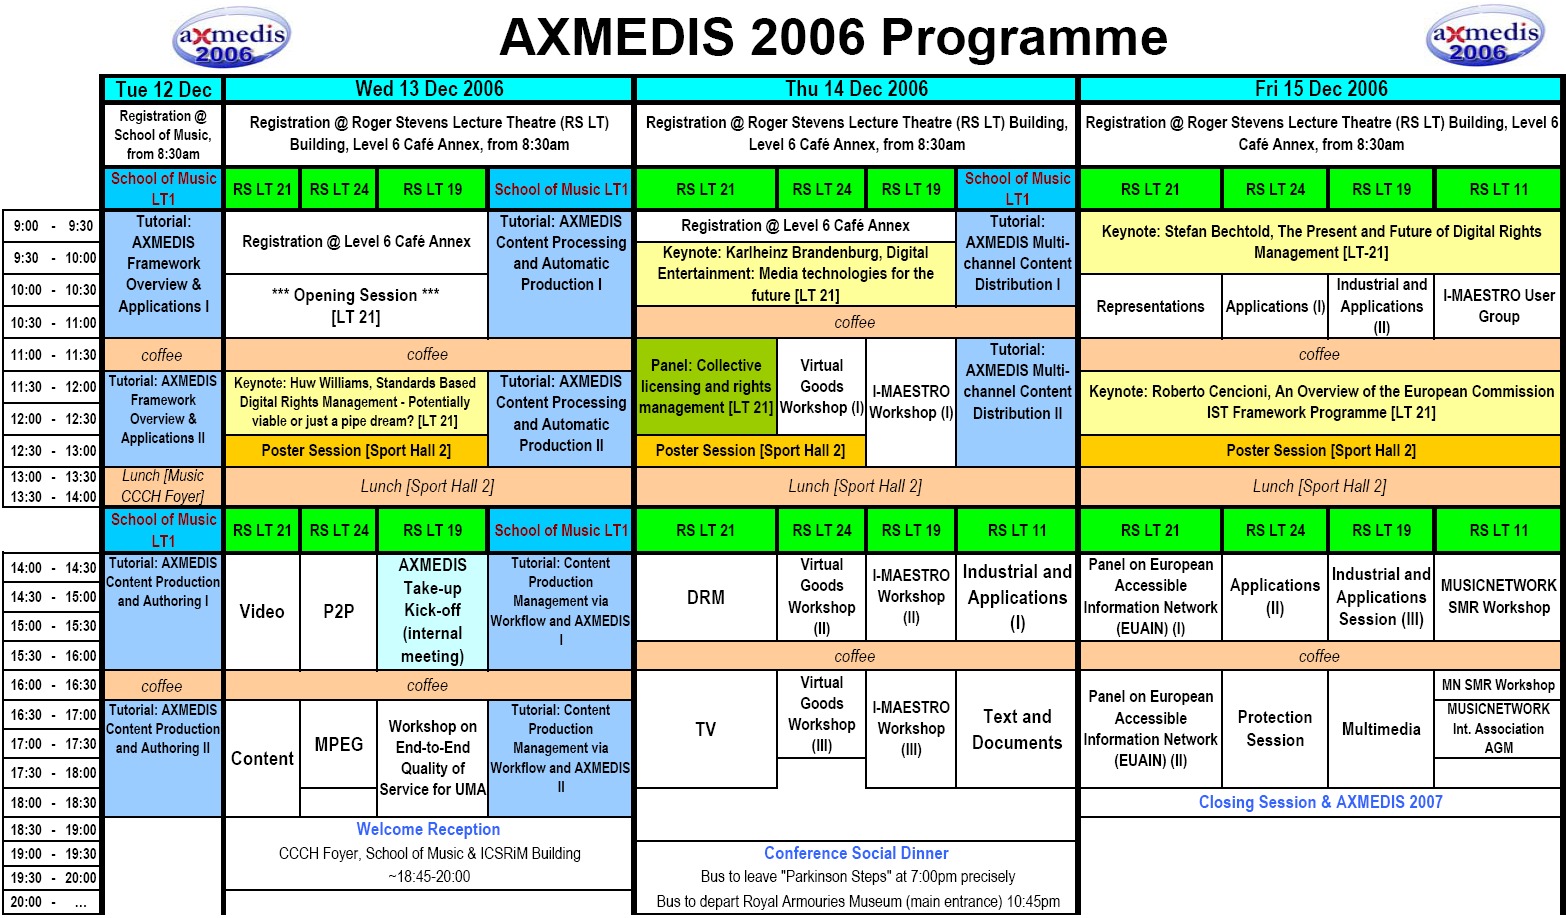 Detailed Programme